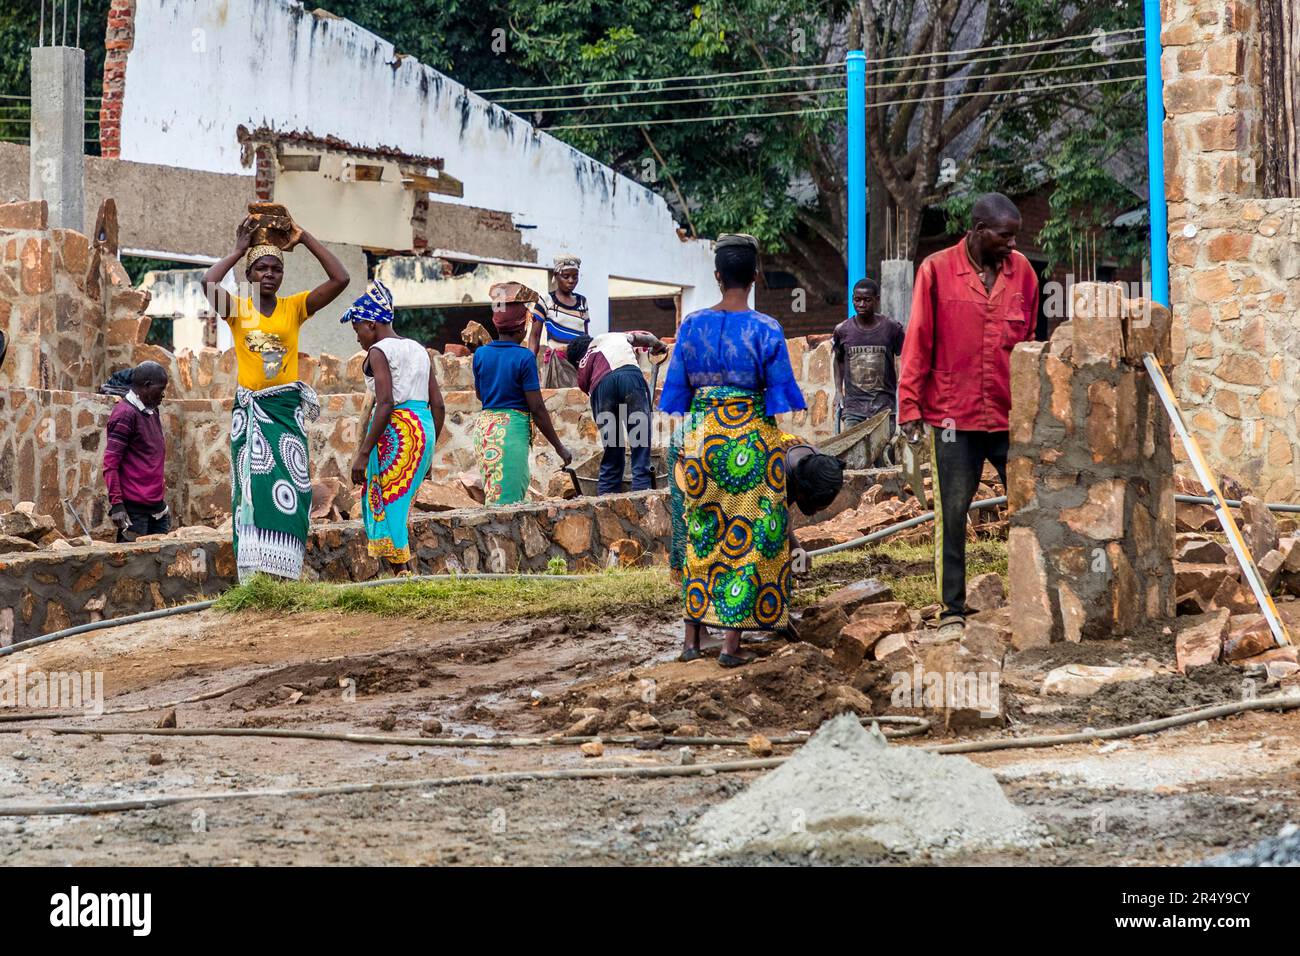 Men and women work together on the construction site at Kumbali Country Lodge in Lilongwe, Malawi Stock Photo